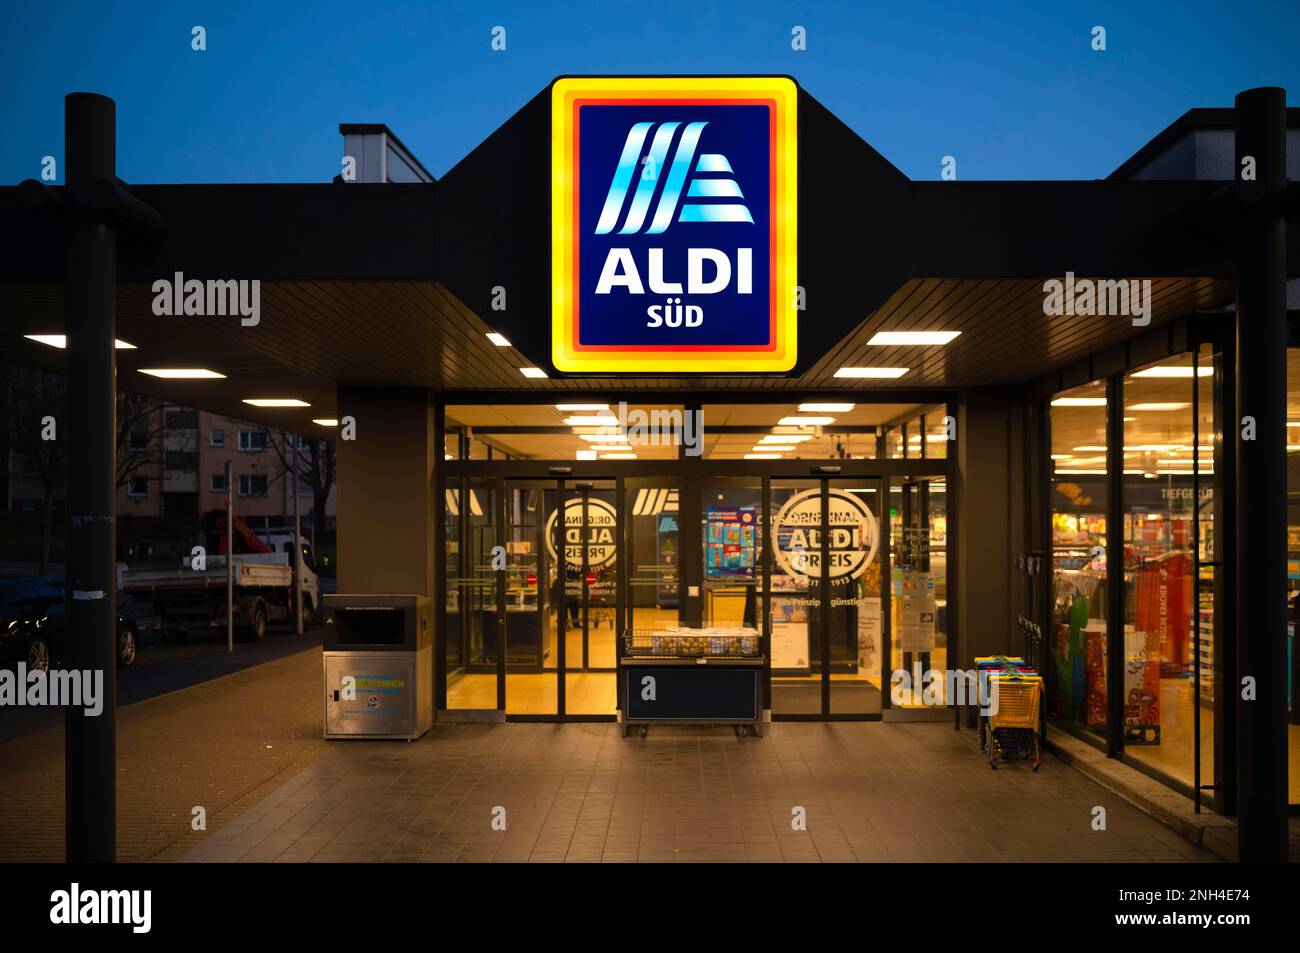 Entrance ALDI Sued, retail chain, grocery shop, logo on sign, blue hour, Stuttgart, Baden-Wuerttemberg, Germany Stock Photo